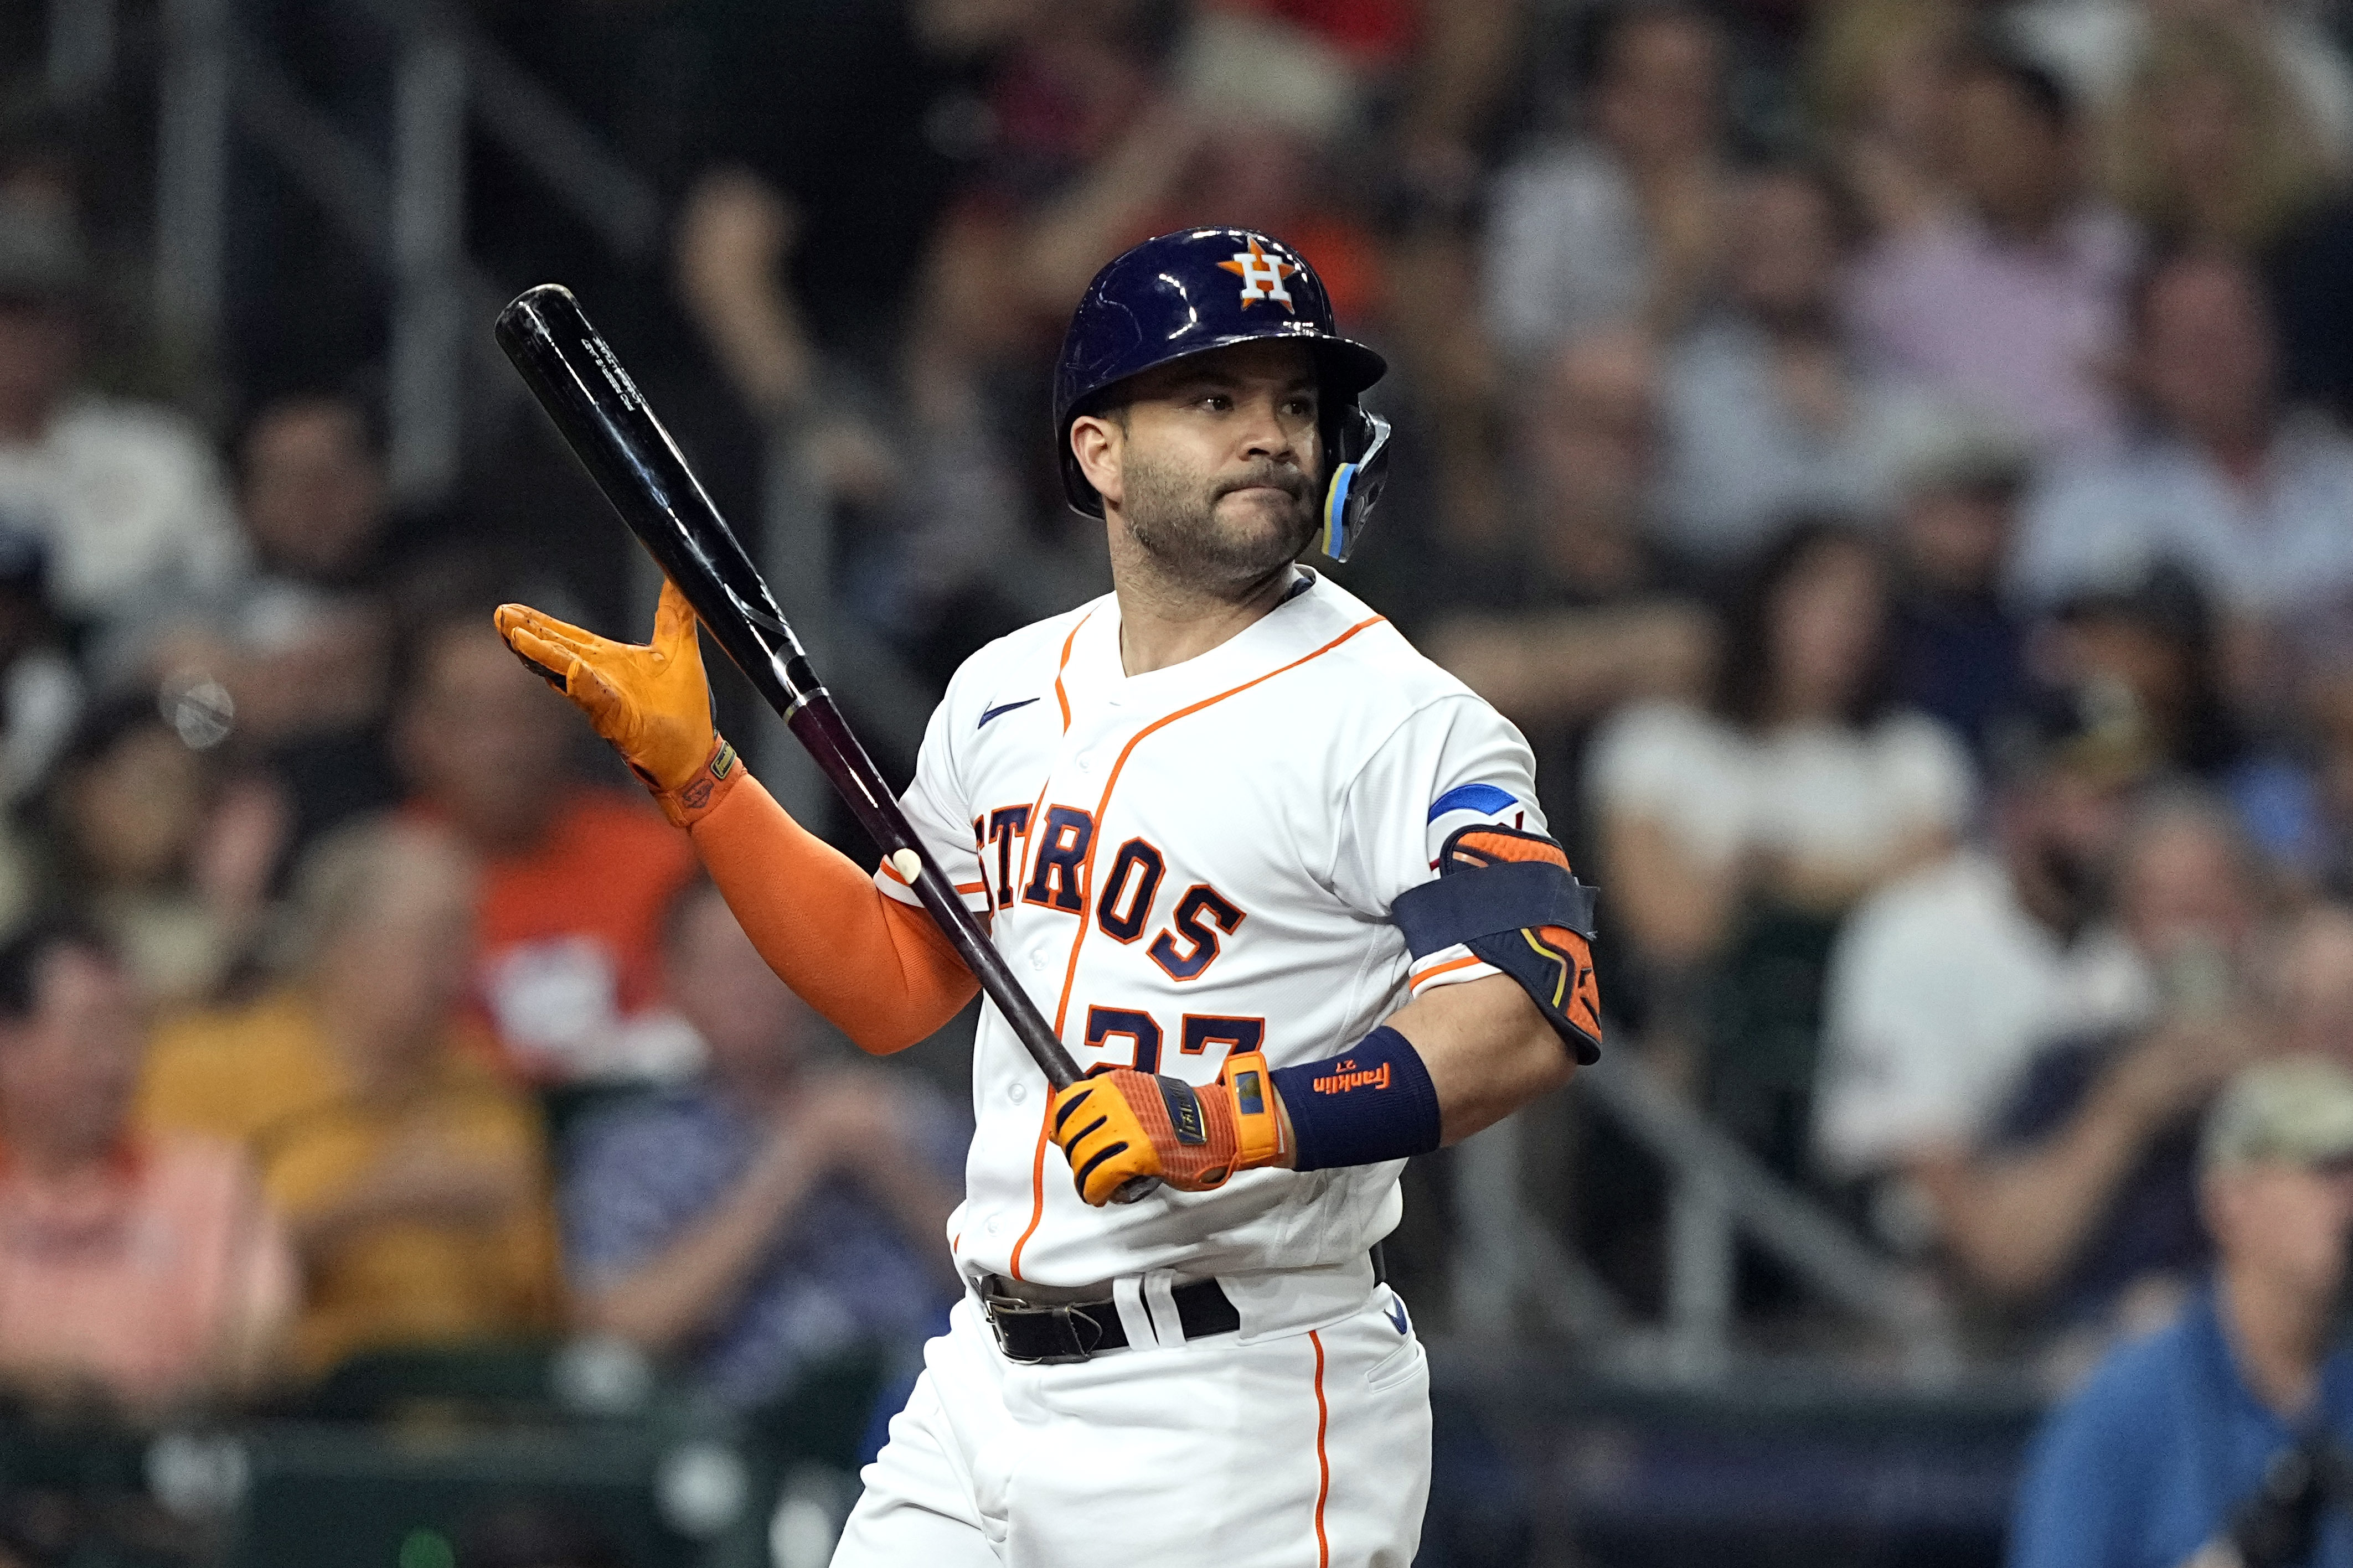 Who could challenge the Astros in the AL West?